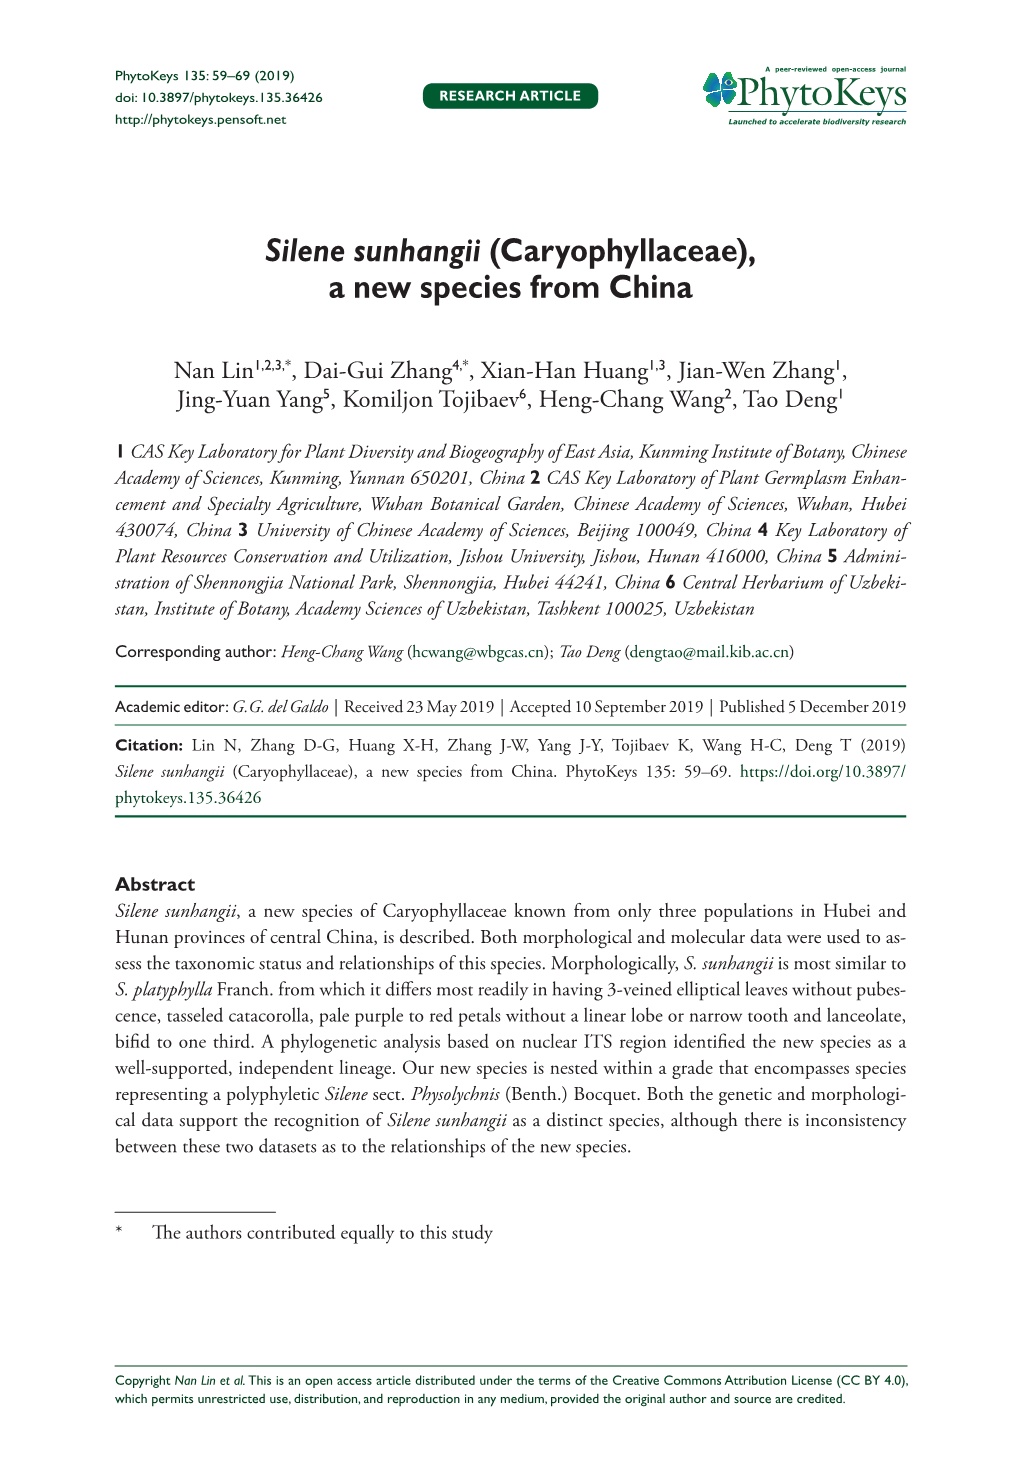 Silene Sunhangii (Caryophyllaceae), a New Species from China